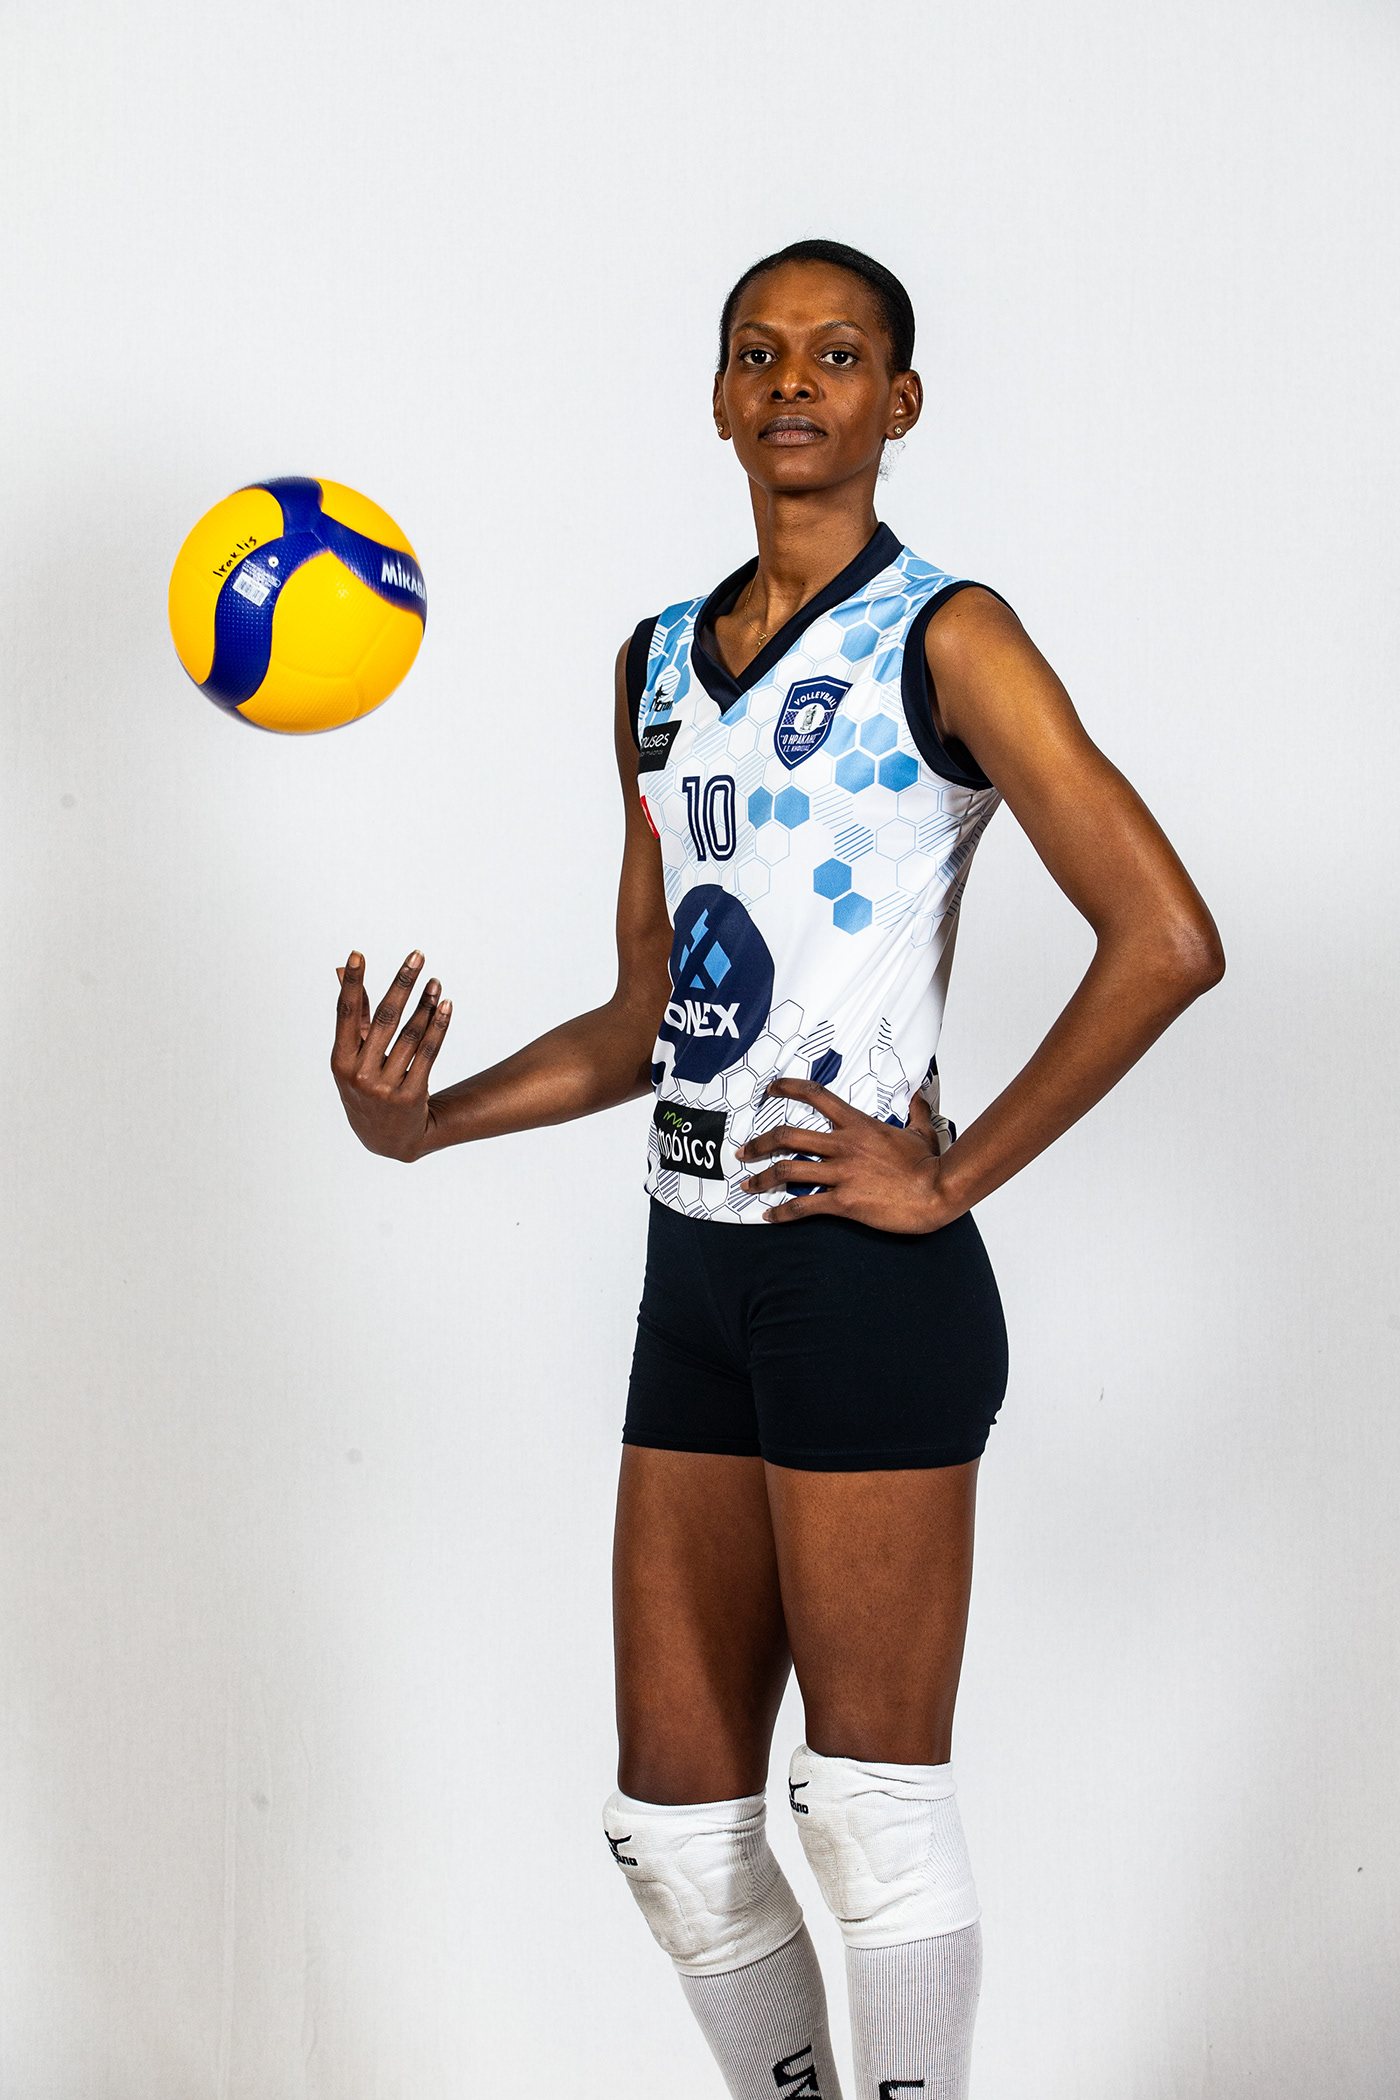 athens Greece sports volleyball photoshoot official women athletes Photography 